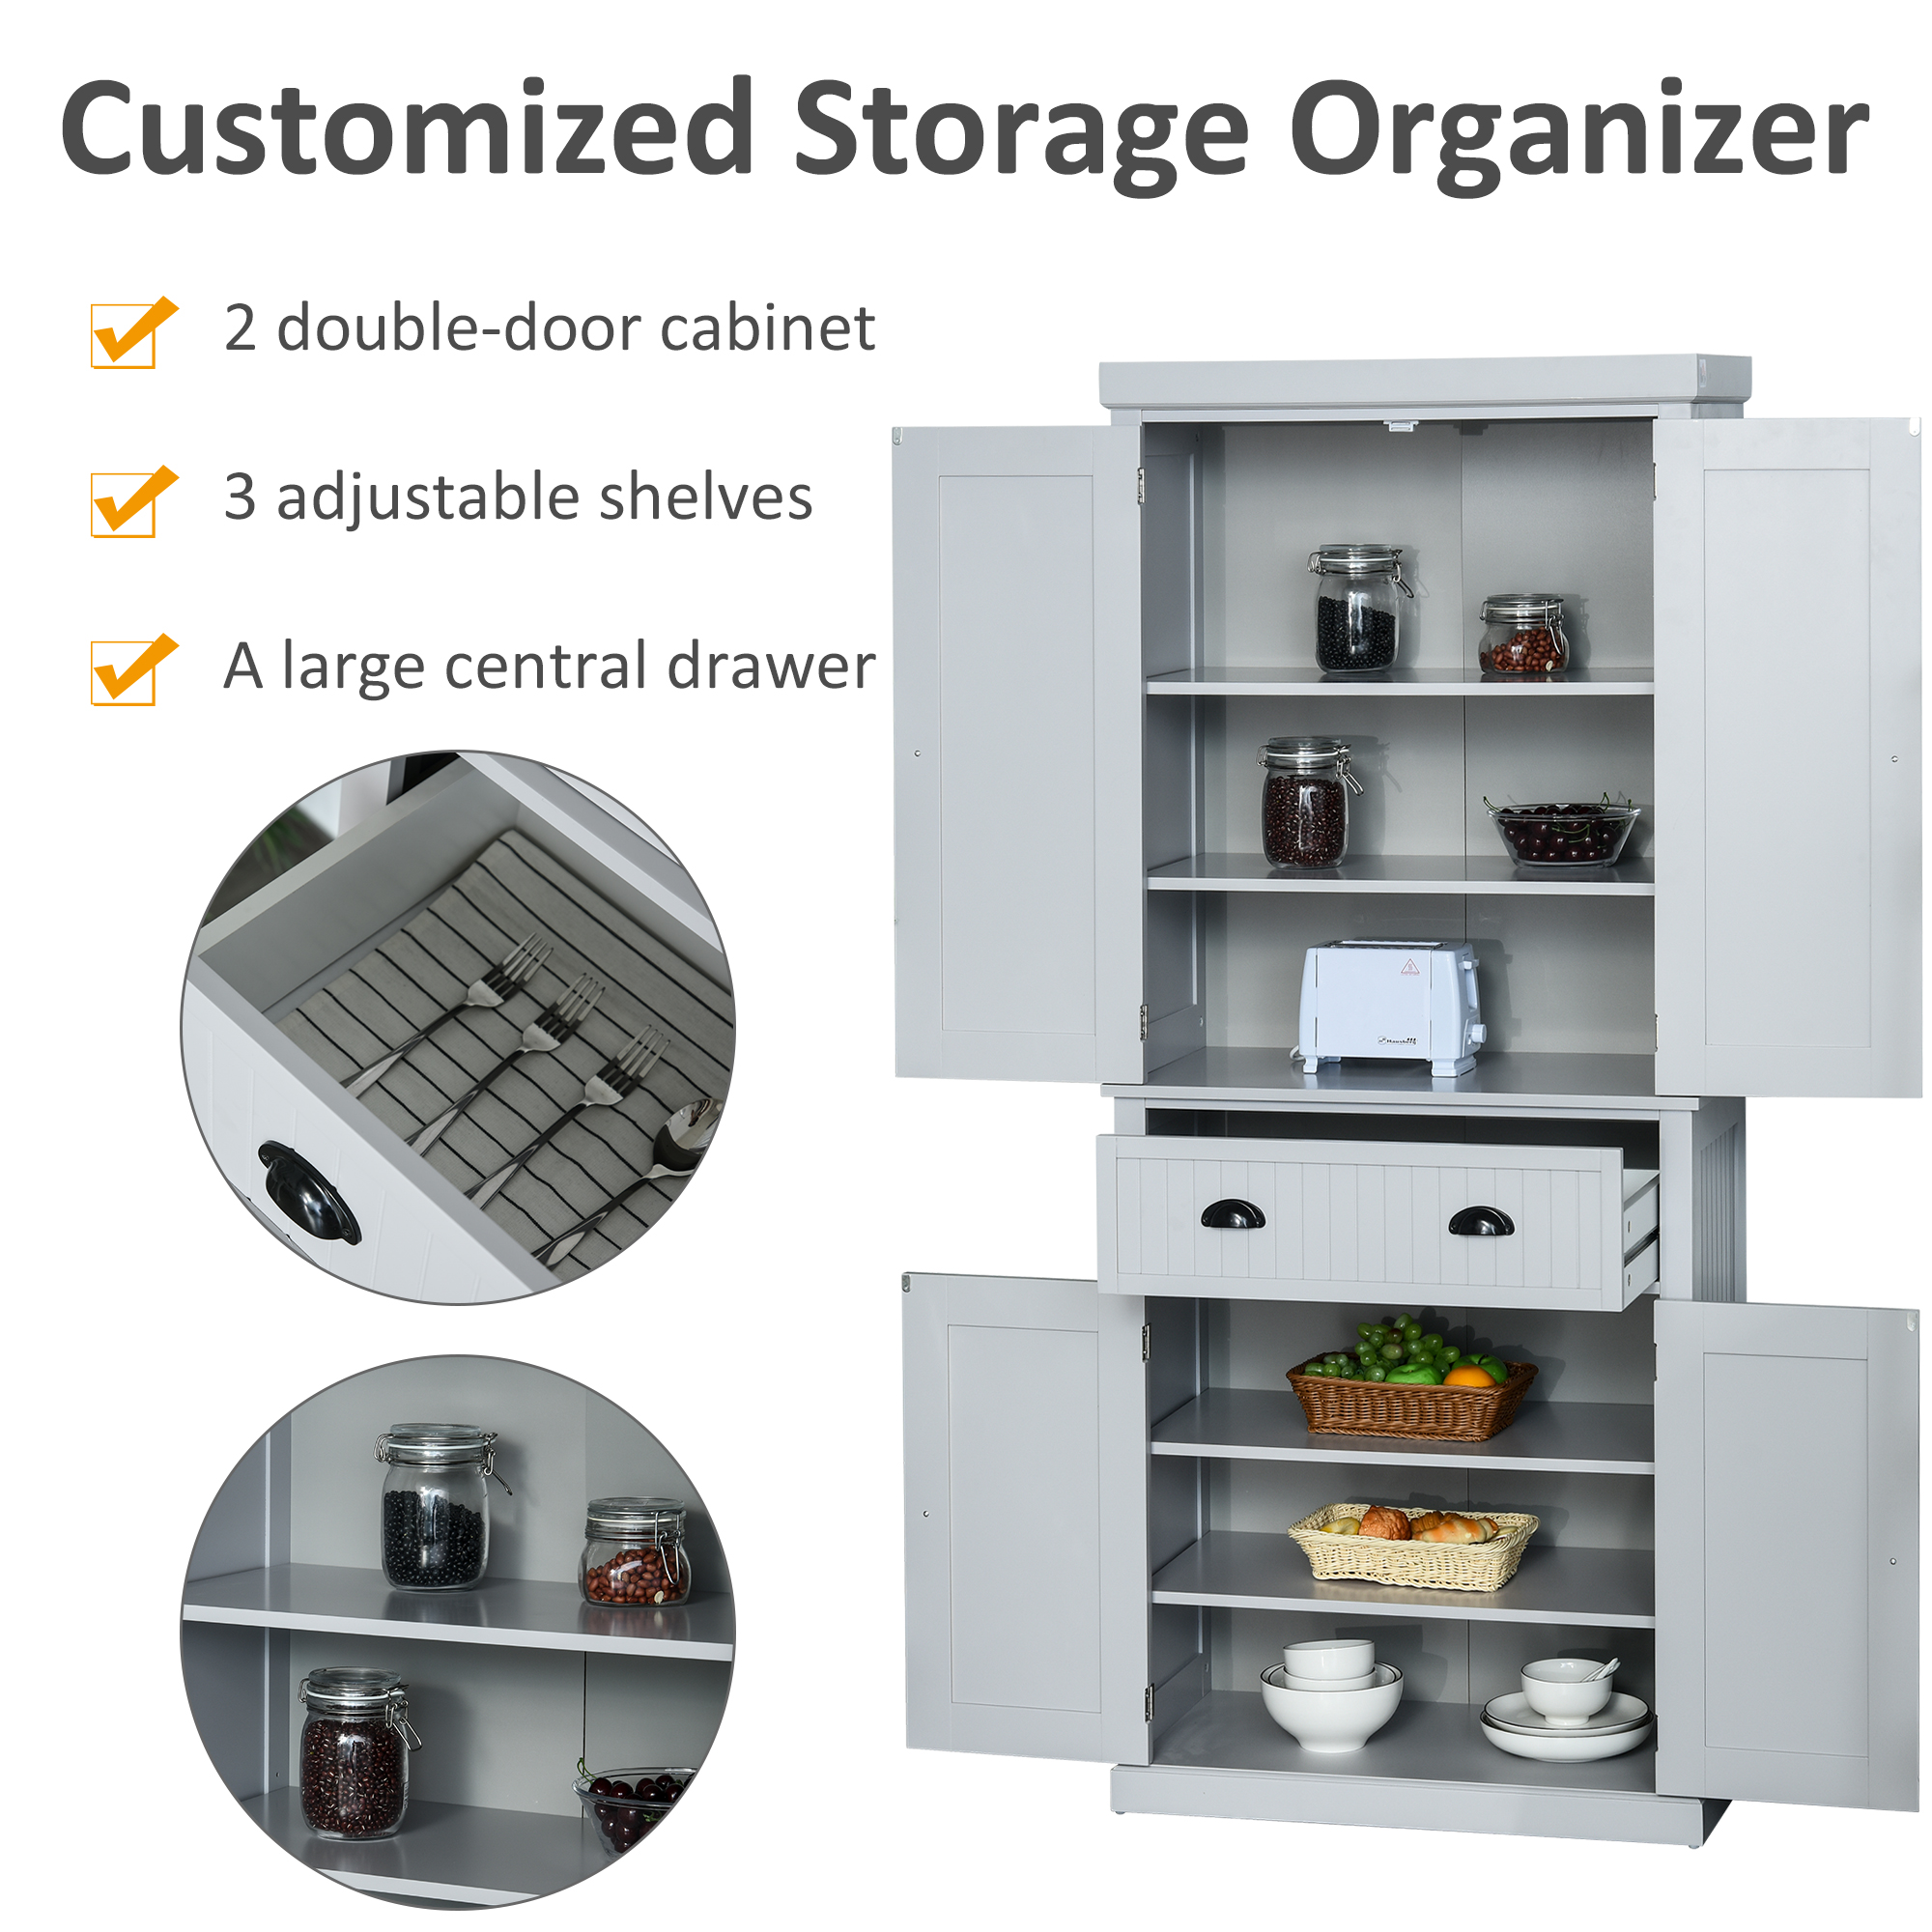 Siavonce Gray Freestanding Tall Kitchen Pantry, 72.4 in. H Kitchen Storage Cabinet Organizer with 4-Doors and Adjustable Shelves